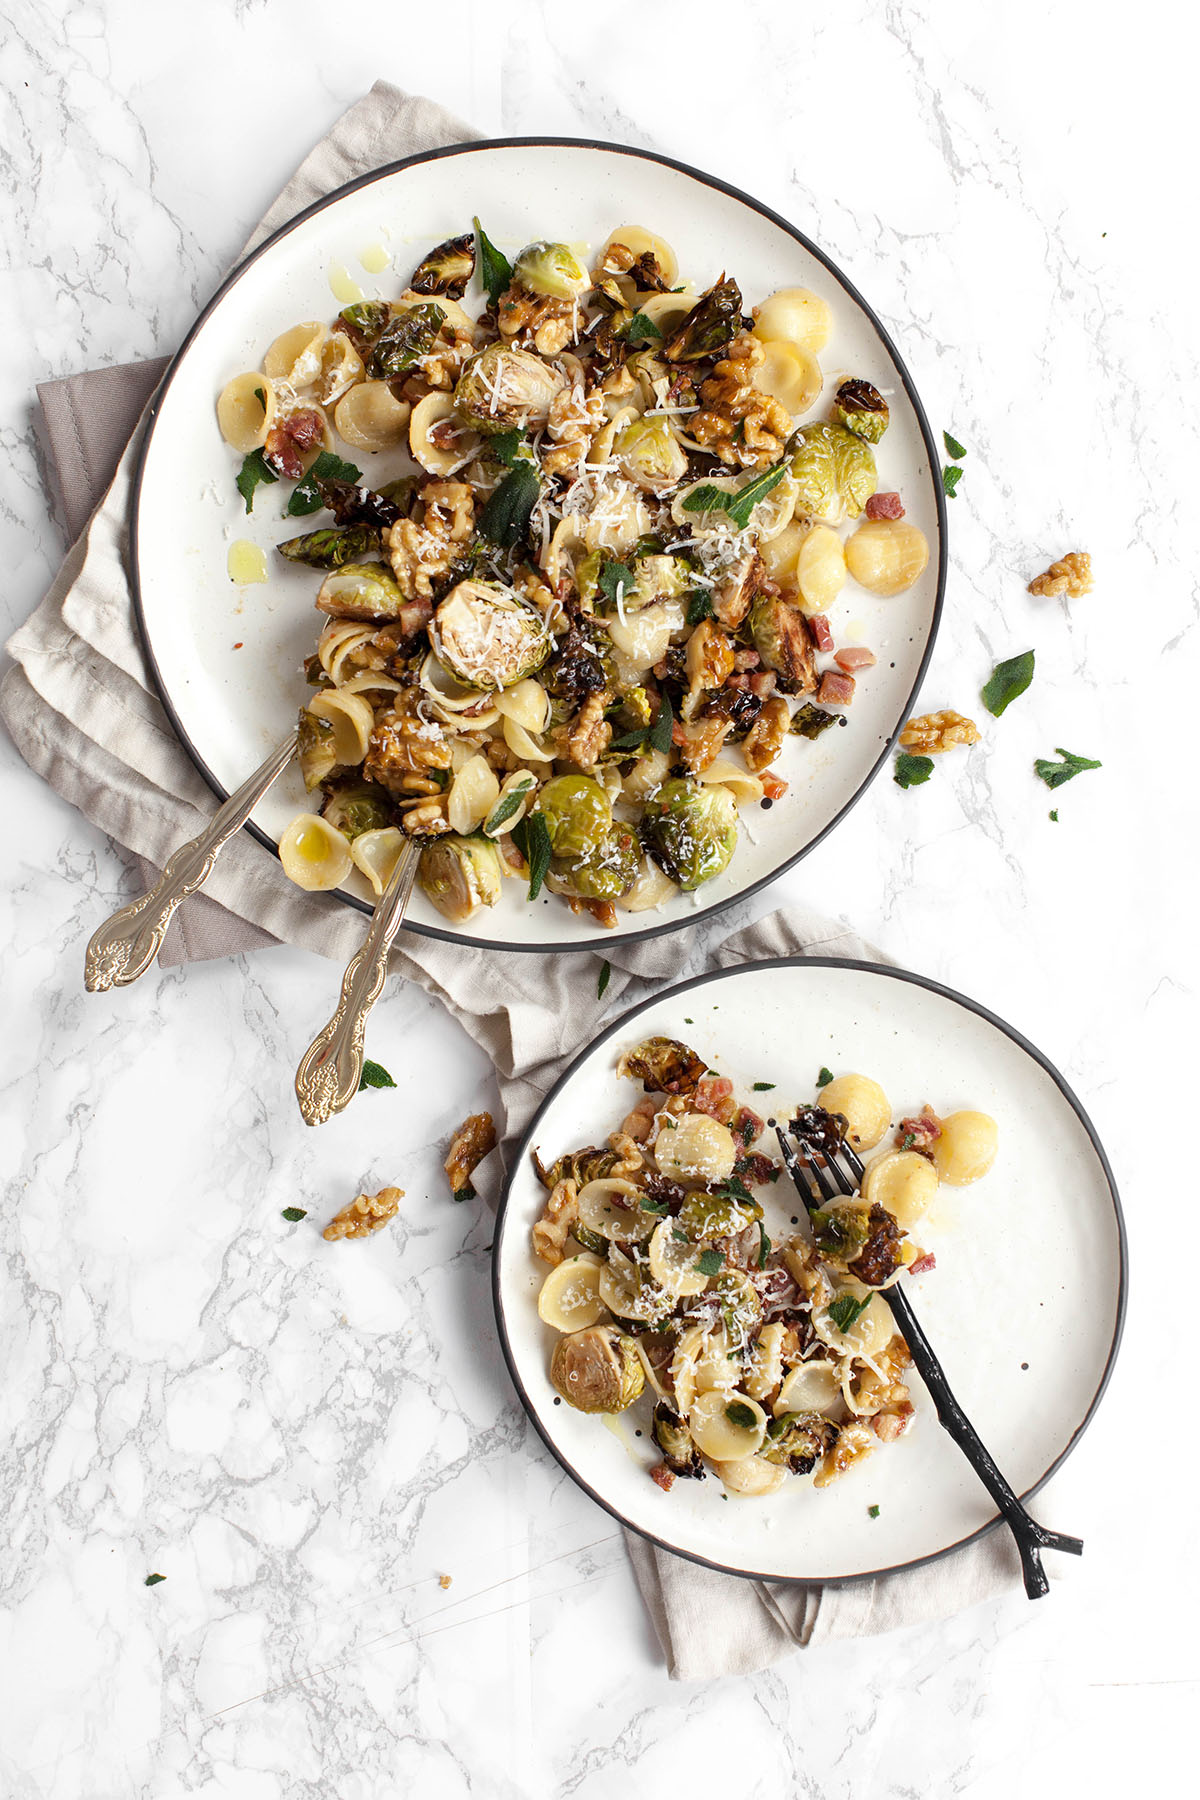 Orecchiette with Brussels Sprouts, Pancetta and Walnuts